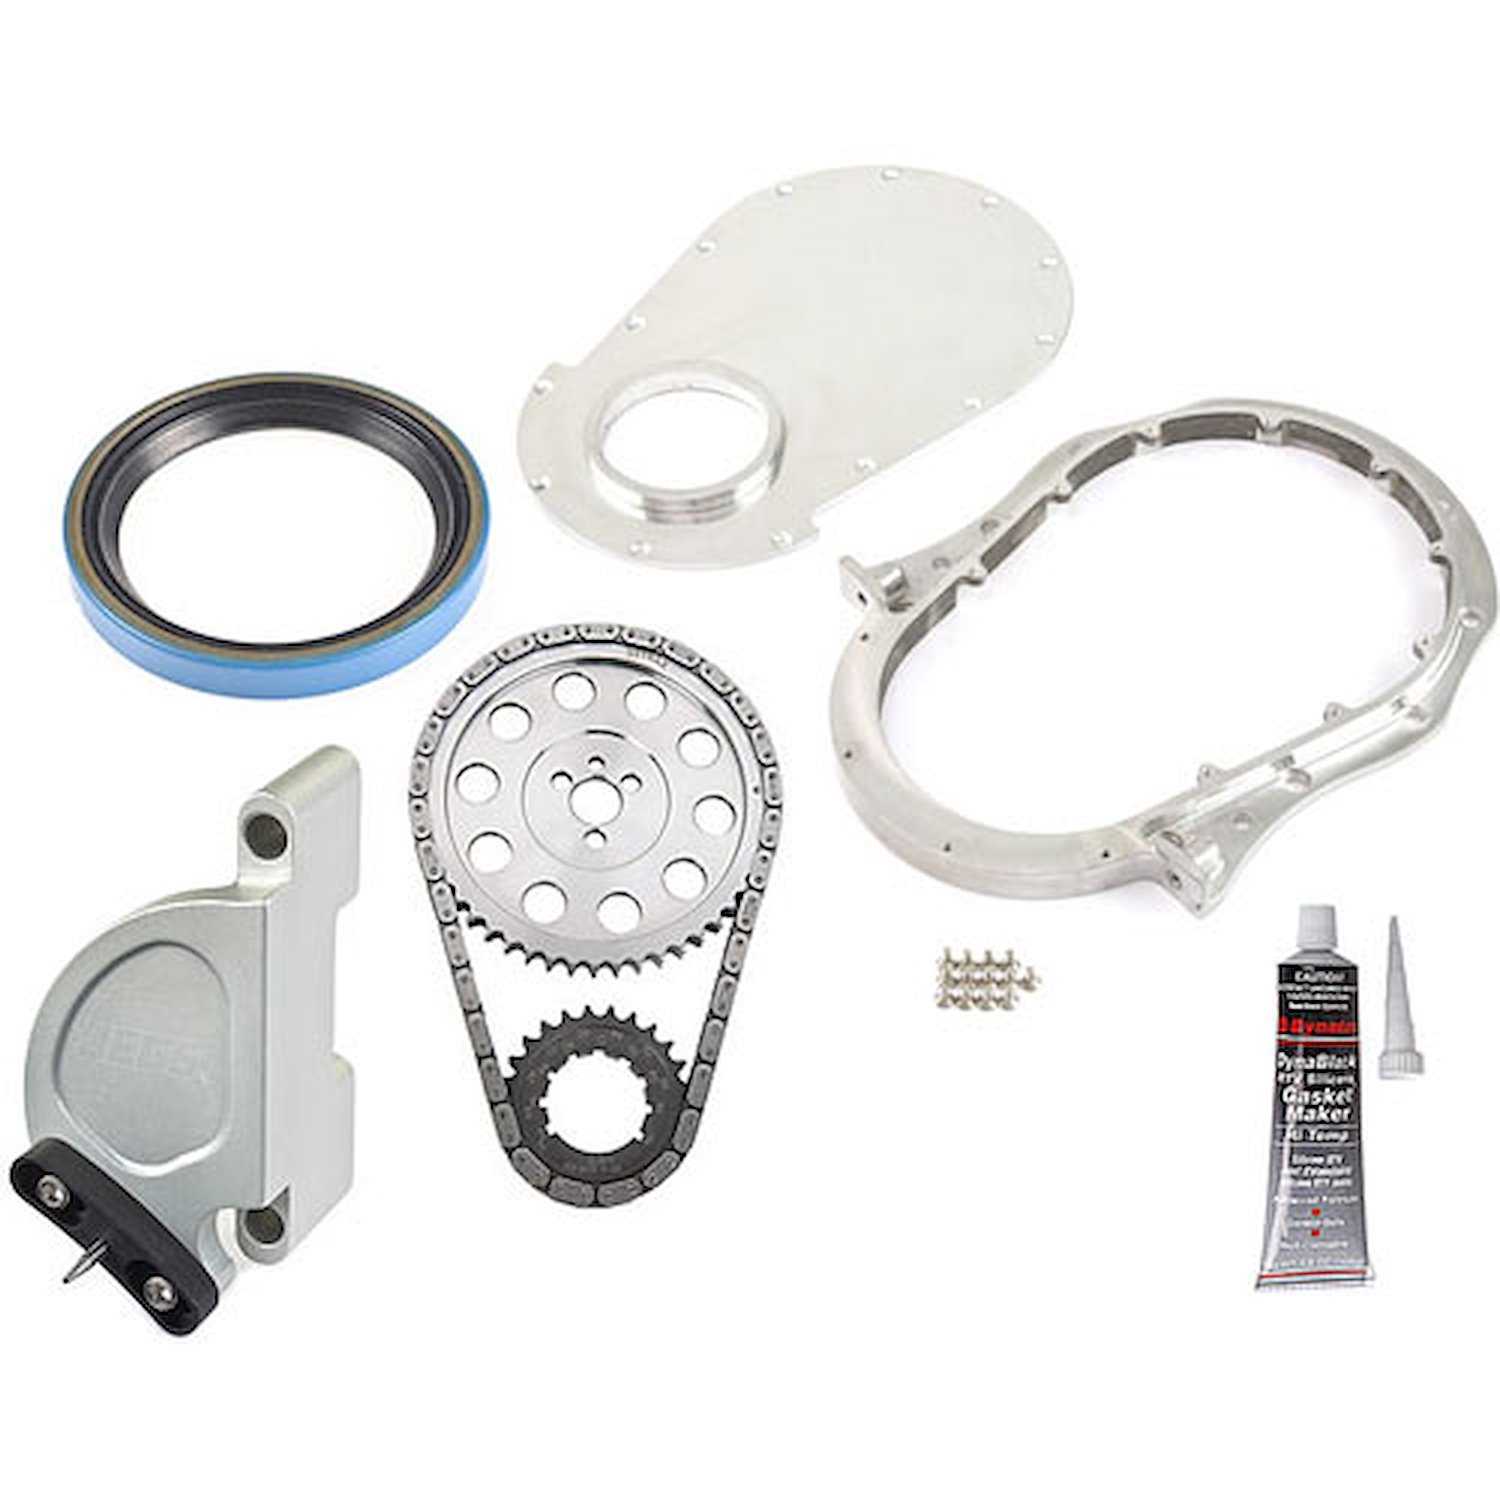 Timing Chain & Cover Kit Big Block Chevy Includes: